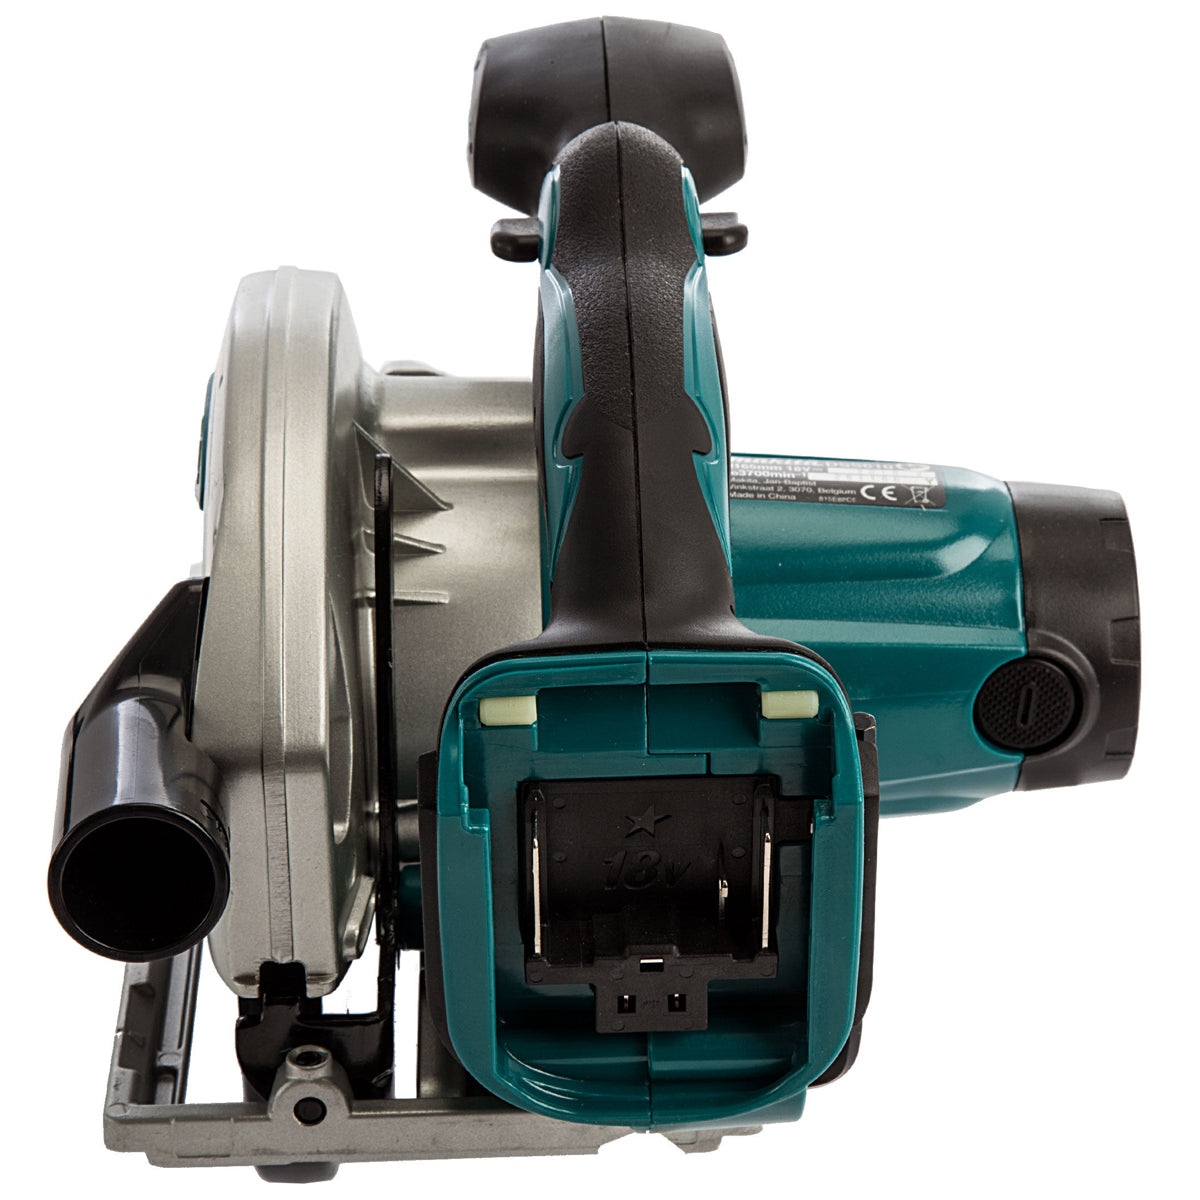 Makita DSS610Z 18V 165mm Circular Saw with 2 x 5.0Ah Batteries & Charger in Case